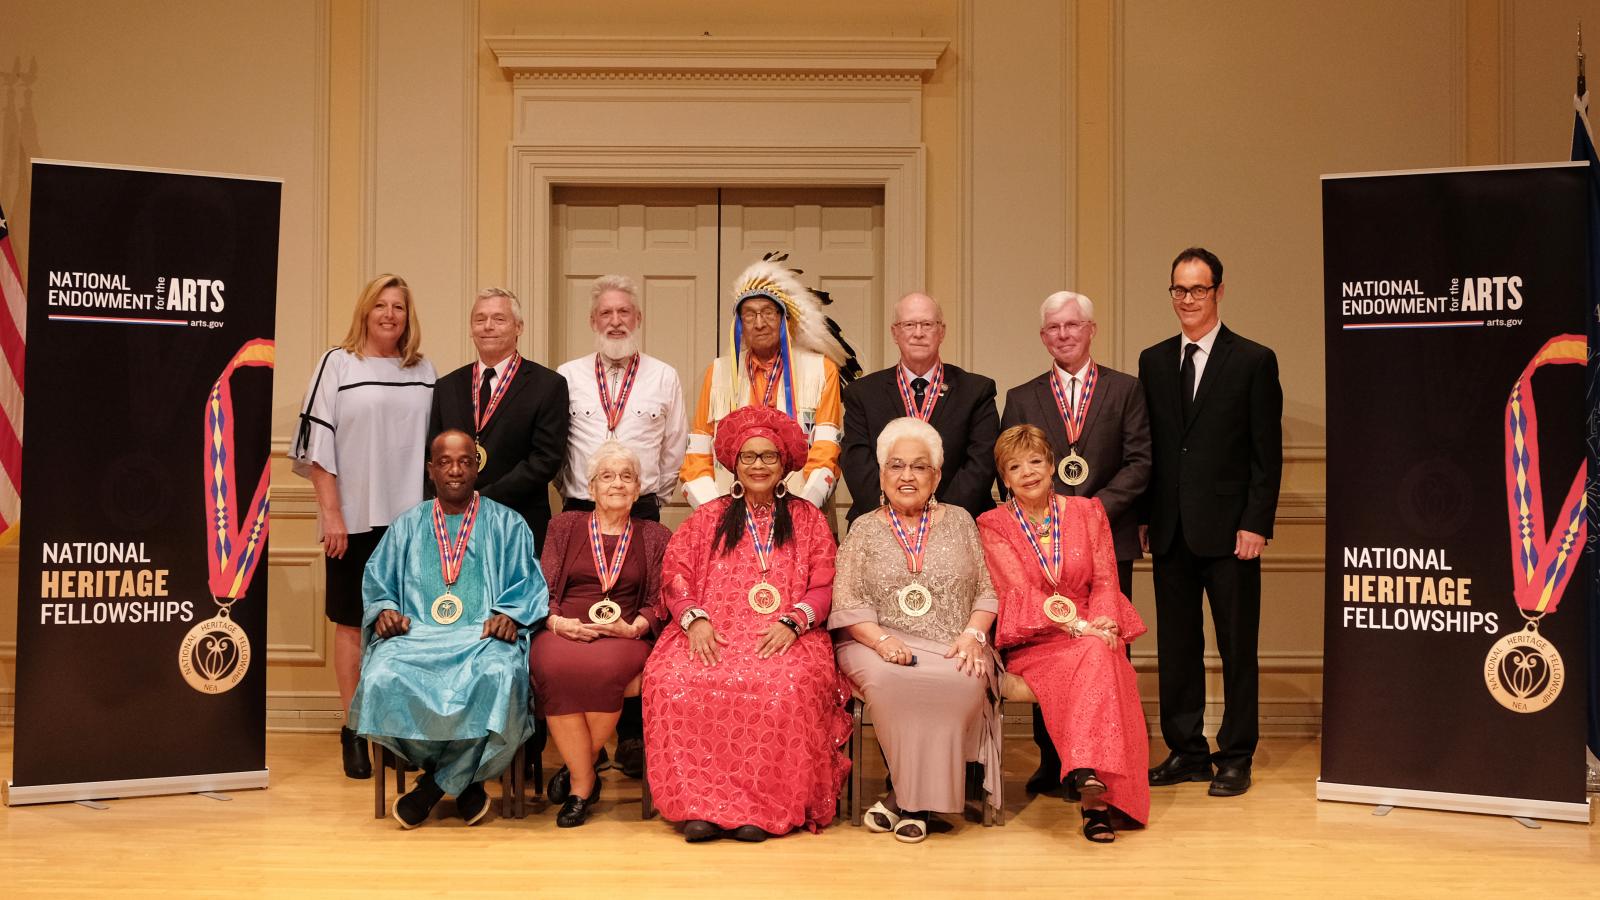 Group of folk artists posing for photo with NEA chairman at left and Folk Arts Director at right. 